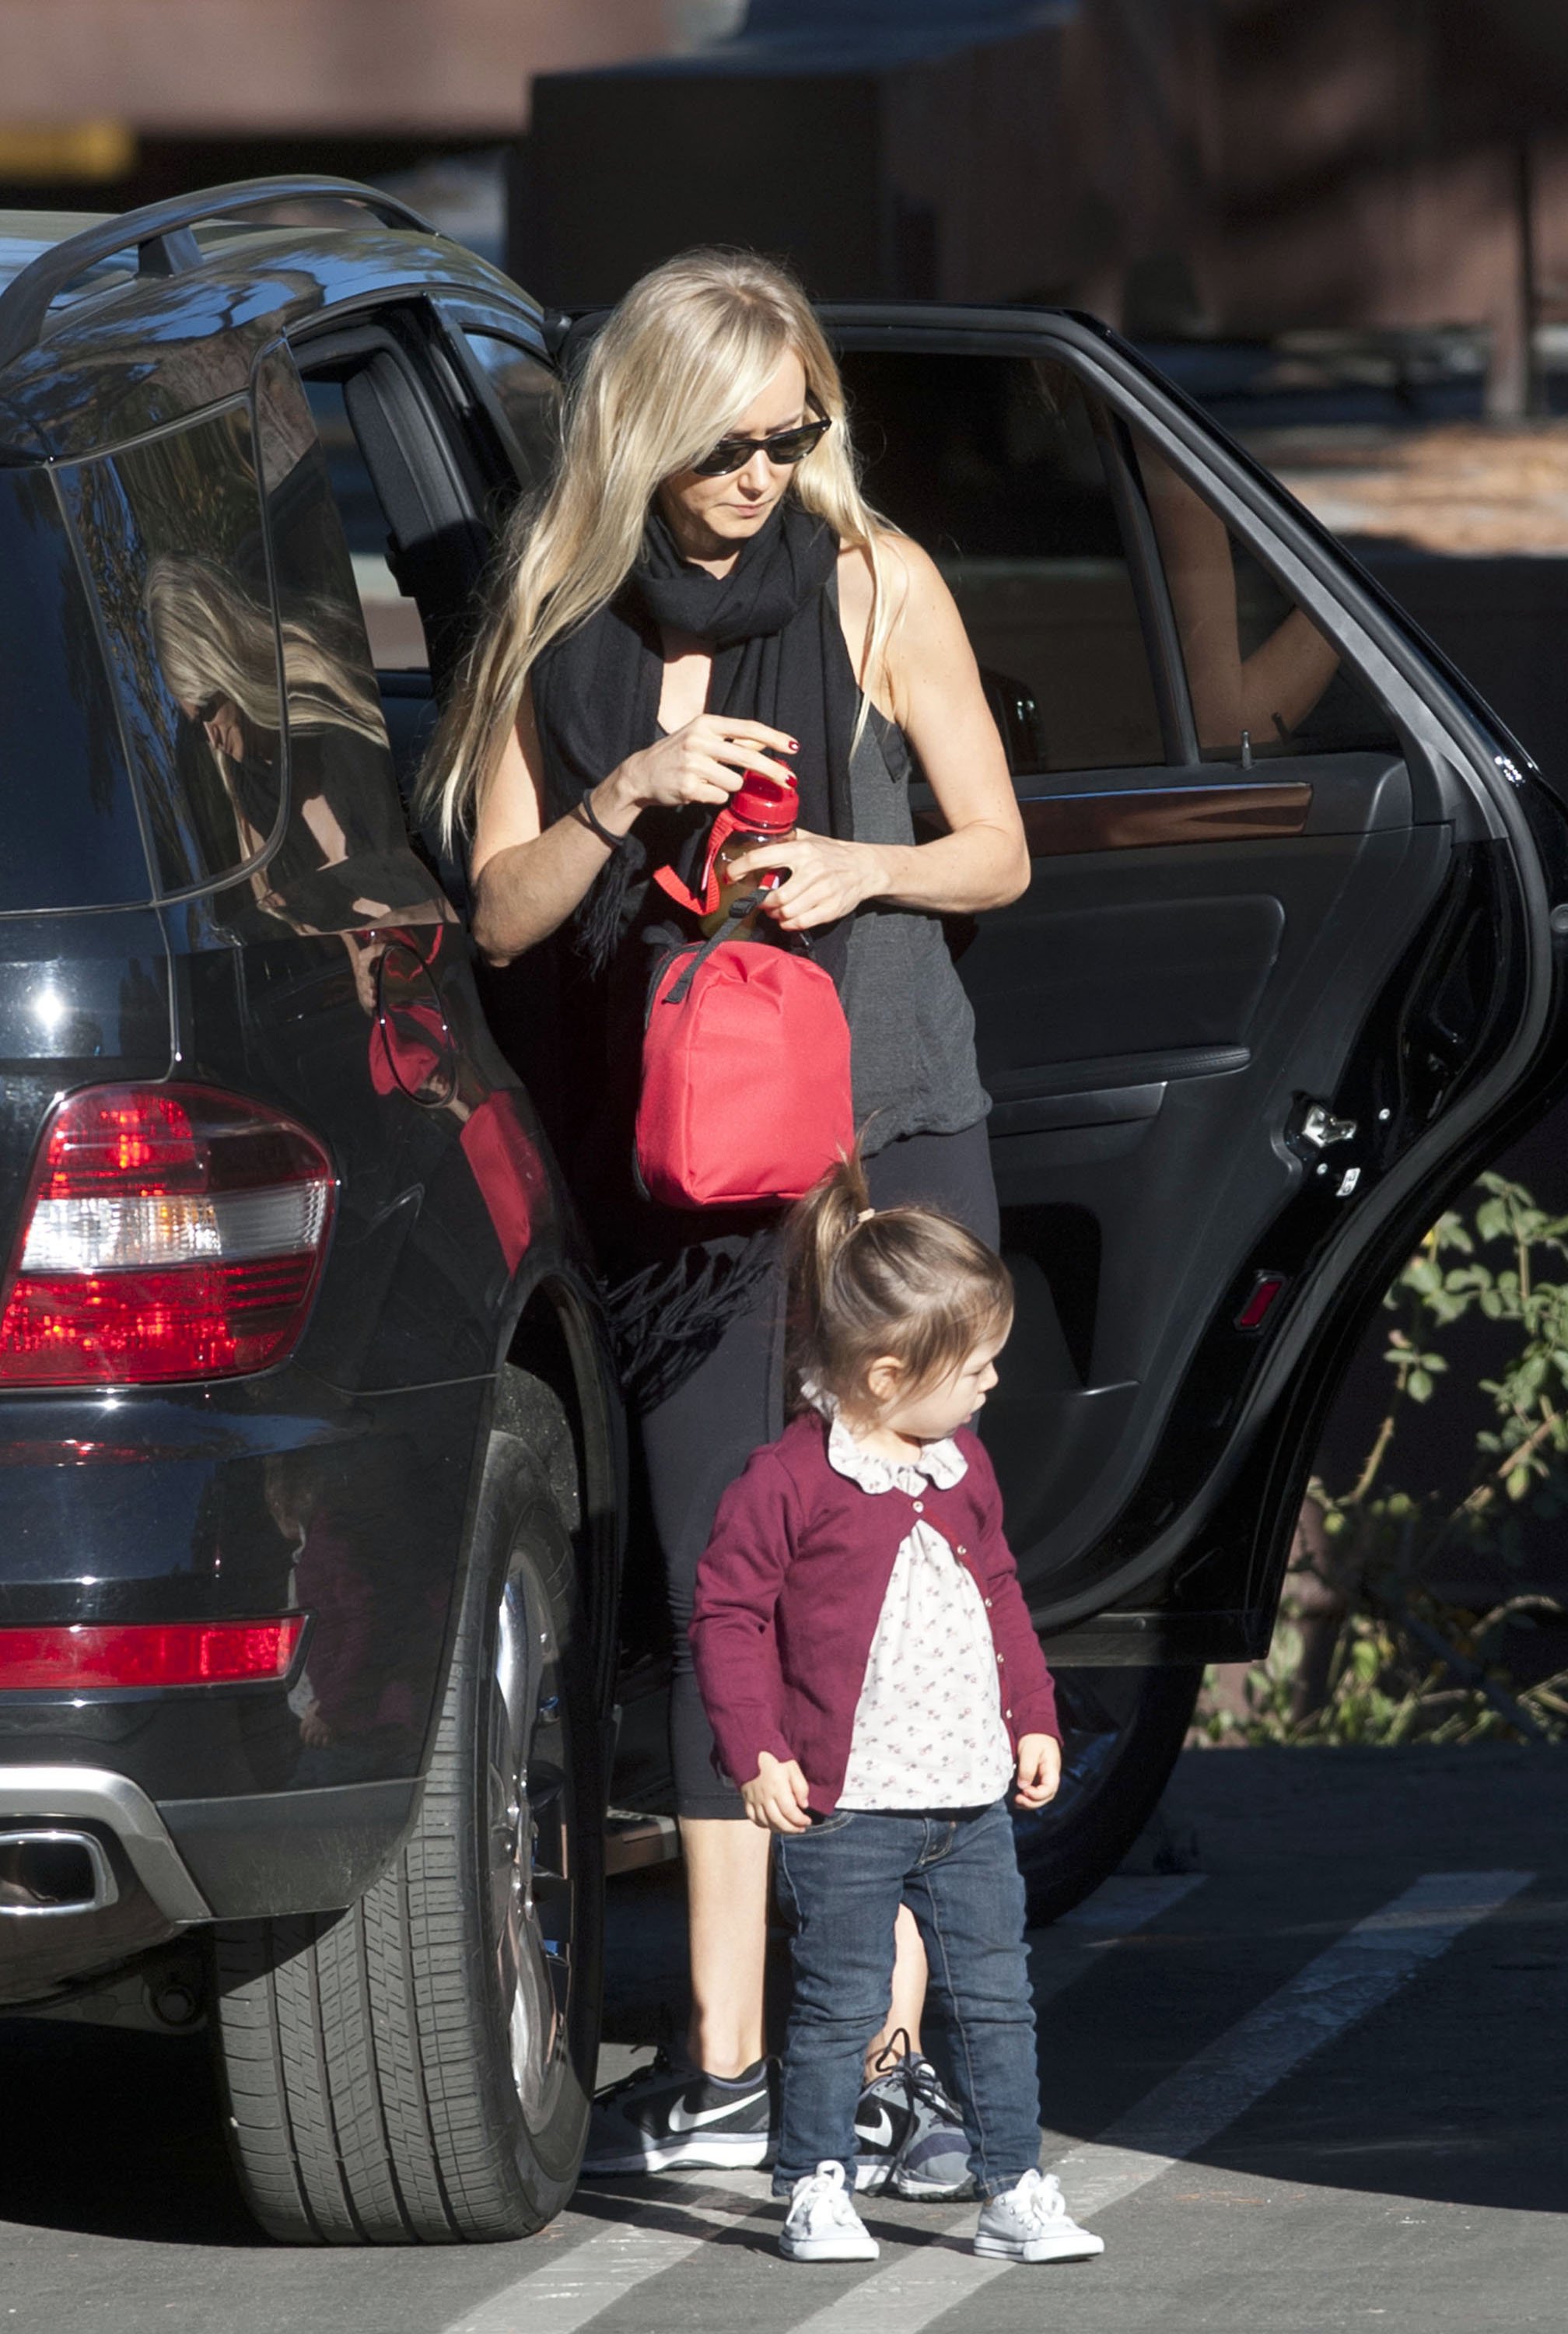 Kimberly Stewart and her daughter, Delilah del Toro seen on November 13, 2013, in Los Angeles, California. | Source: Getty Images